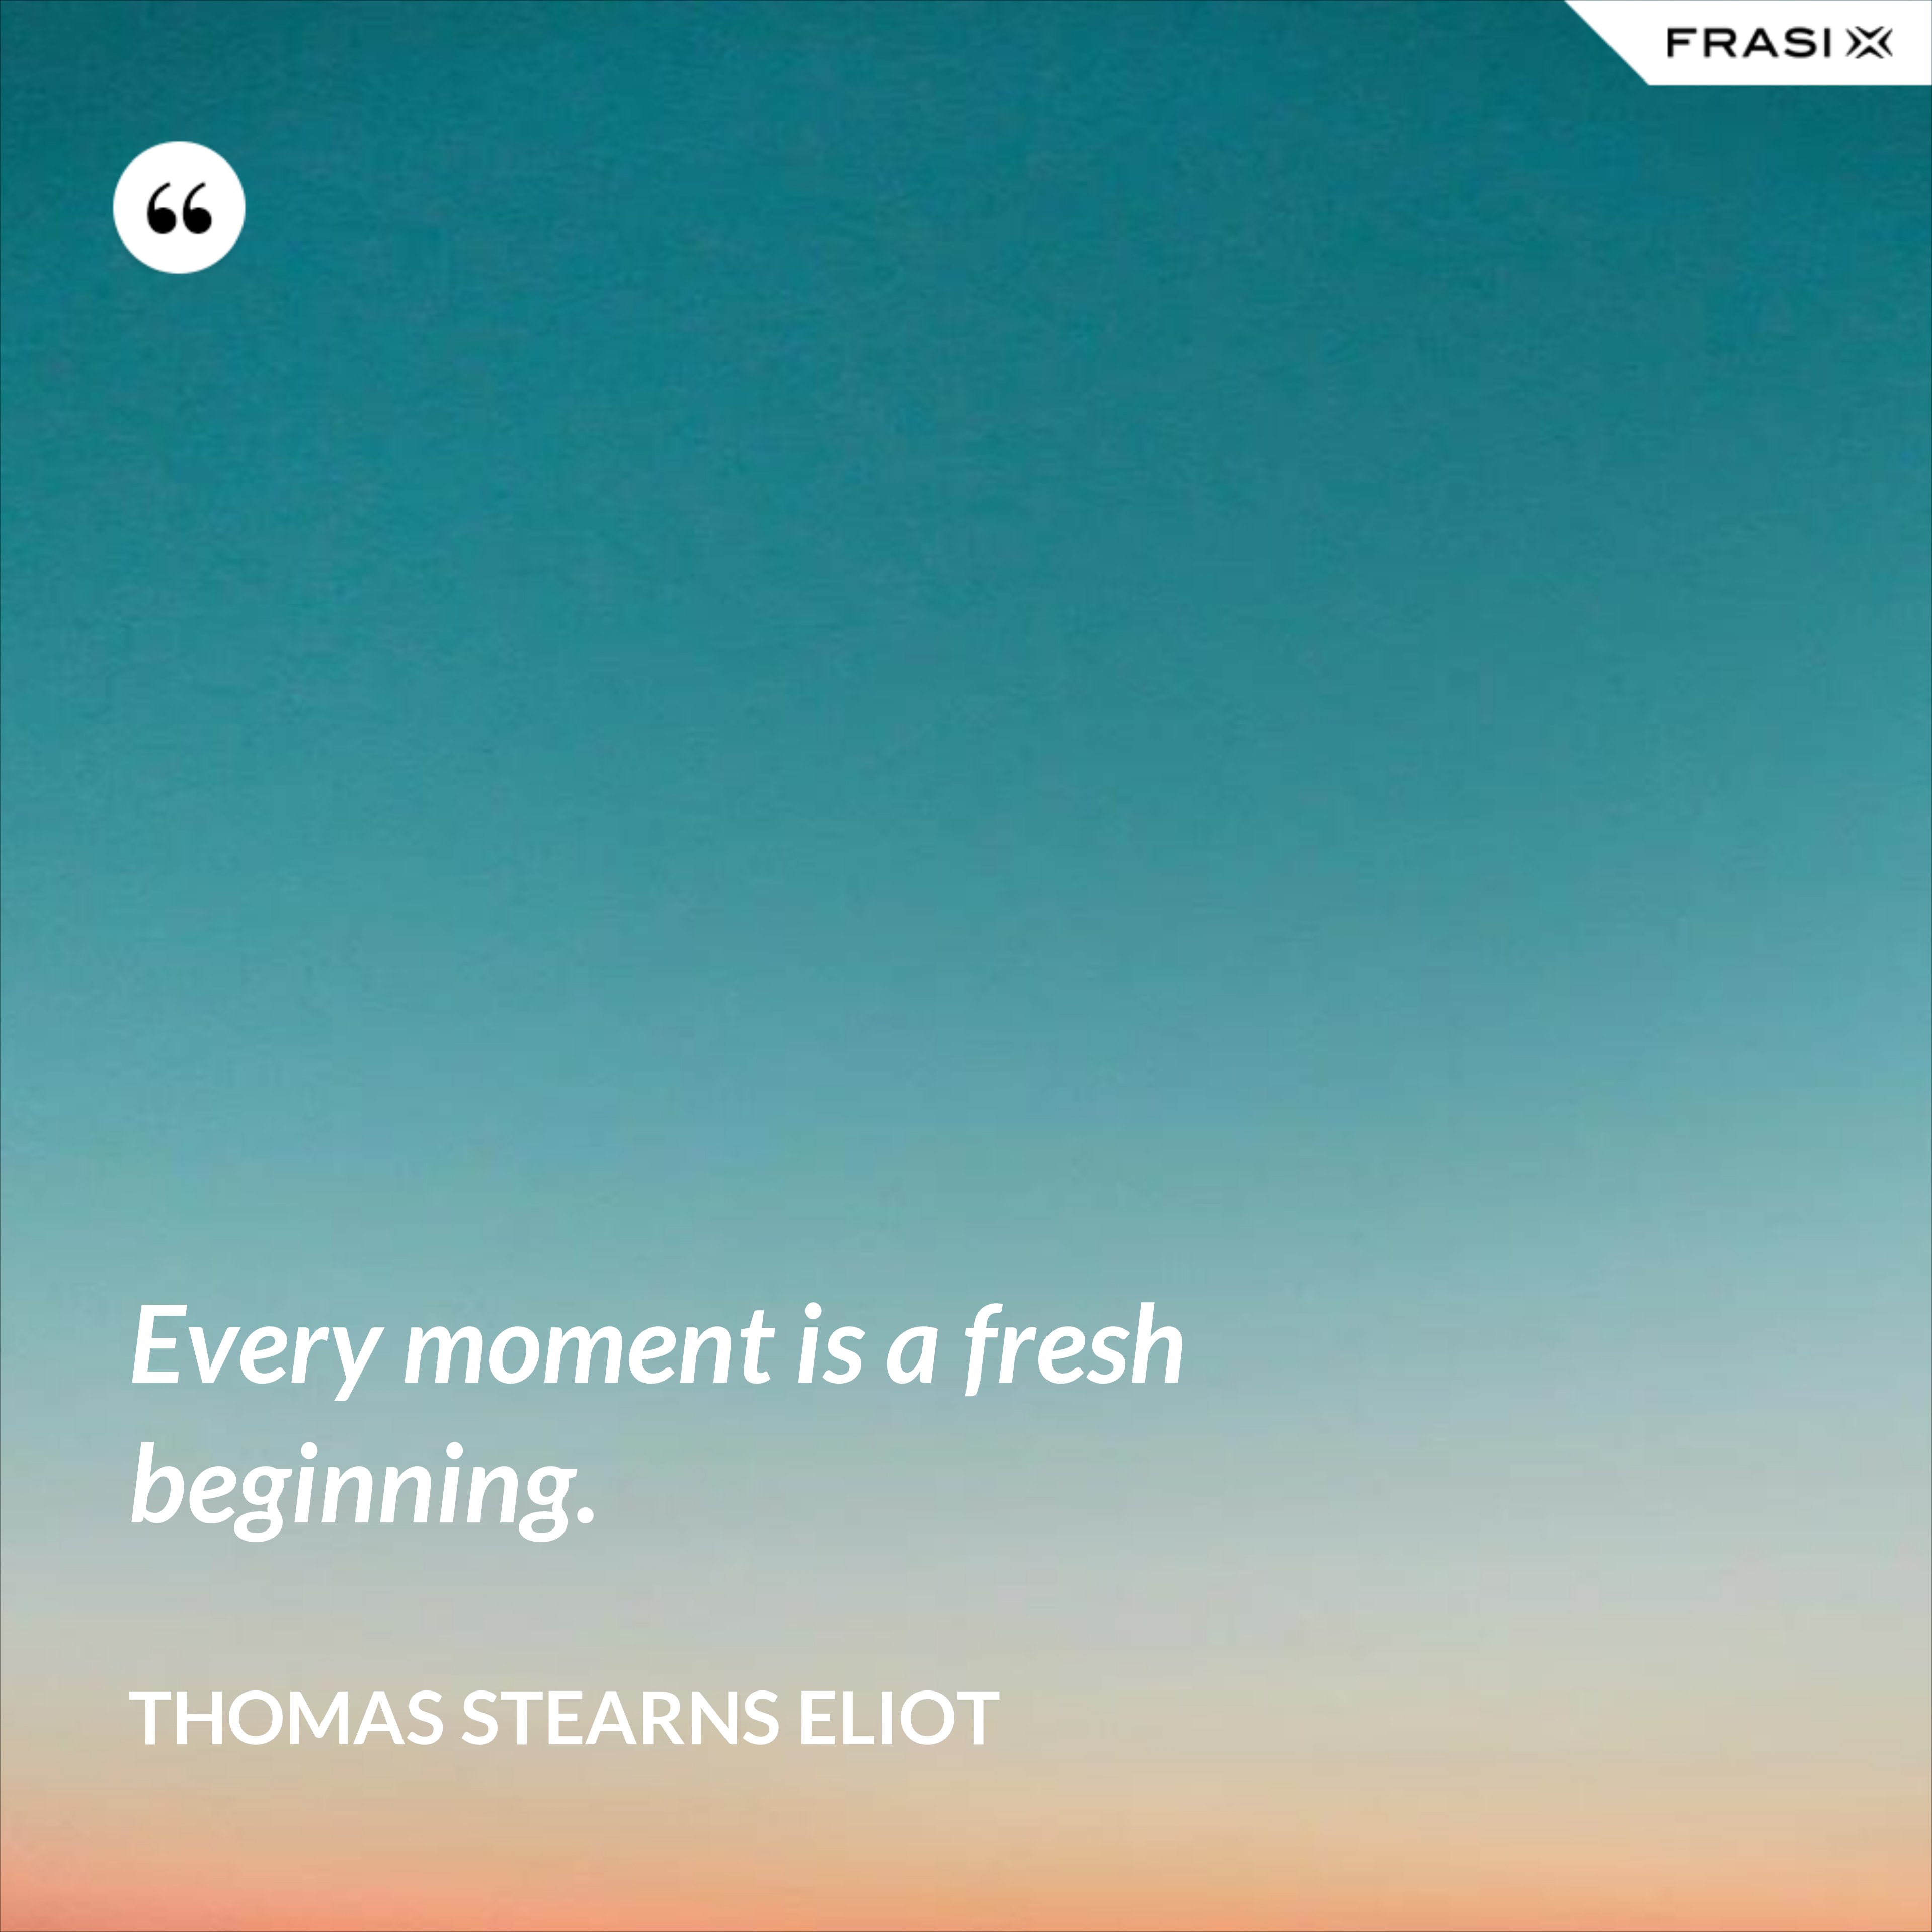 Every moment is a fresh beginning. - Thomas Stearns Eliot